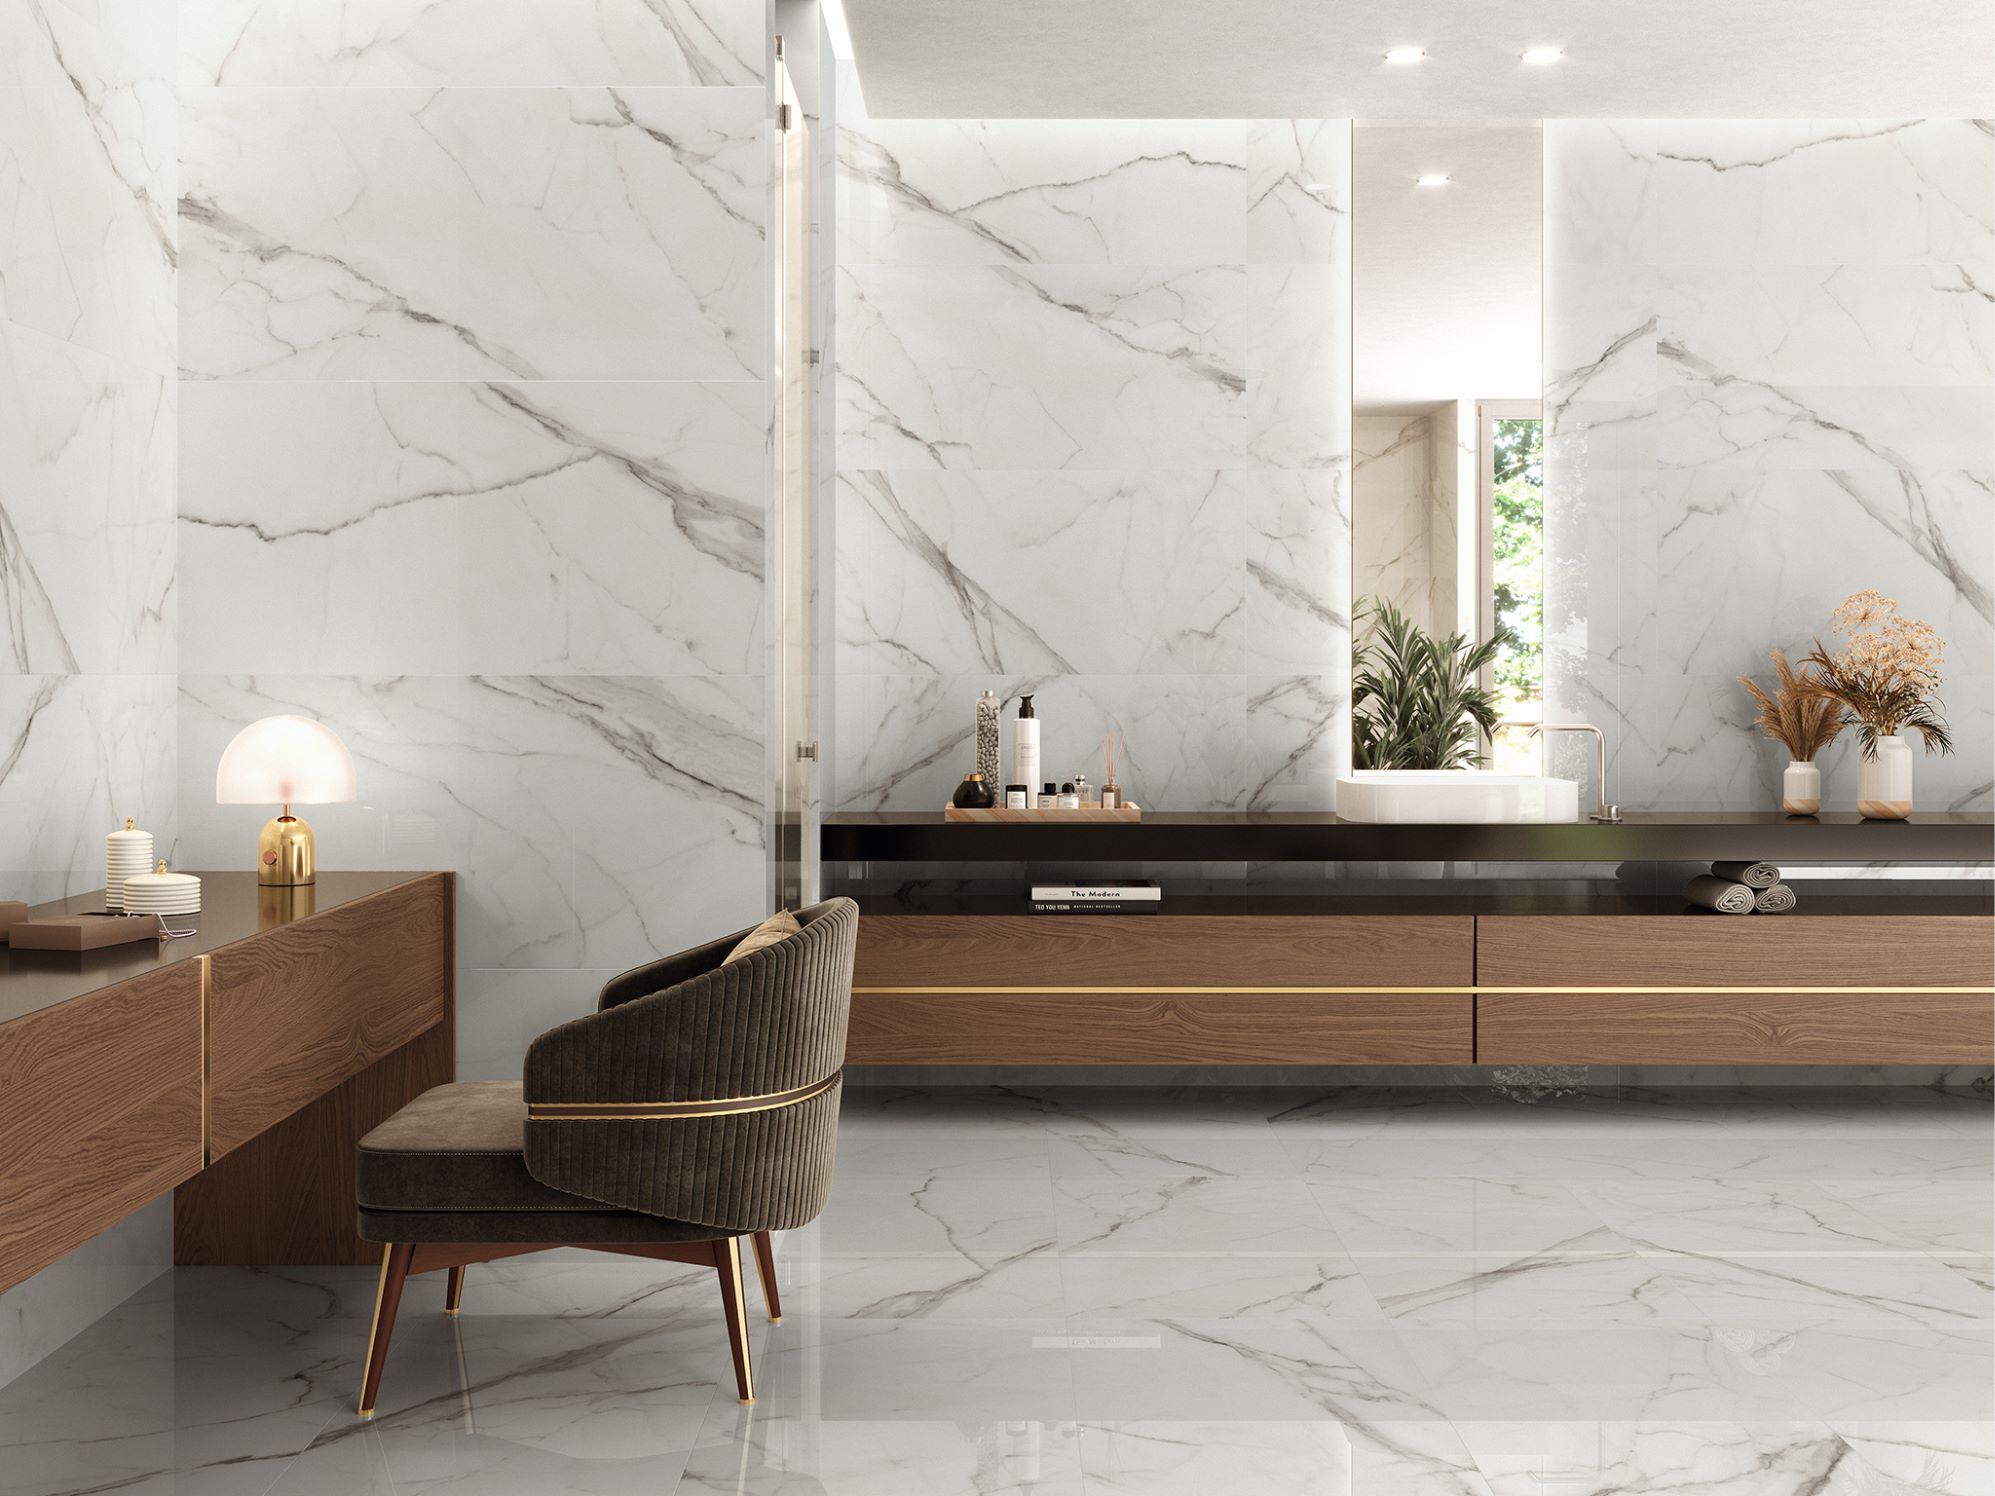 Kinsale White Polished | Stones & More | Finest selection of Mosaics, Glass, Tile and Stone